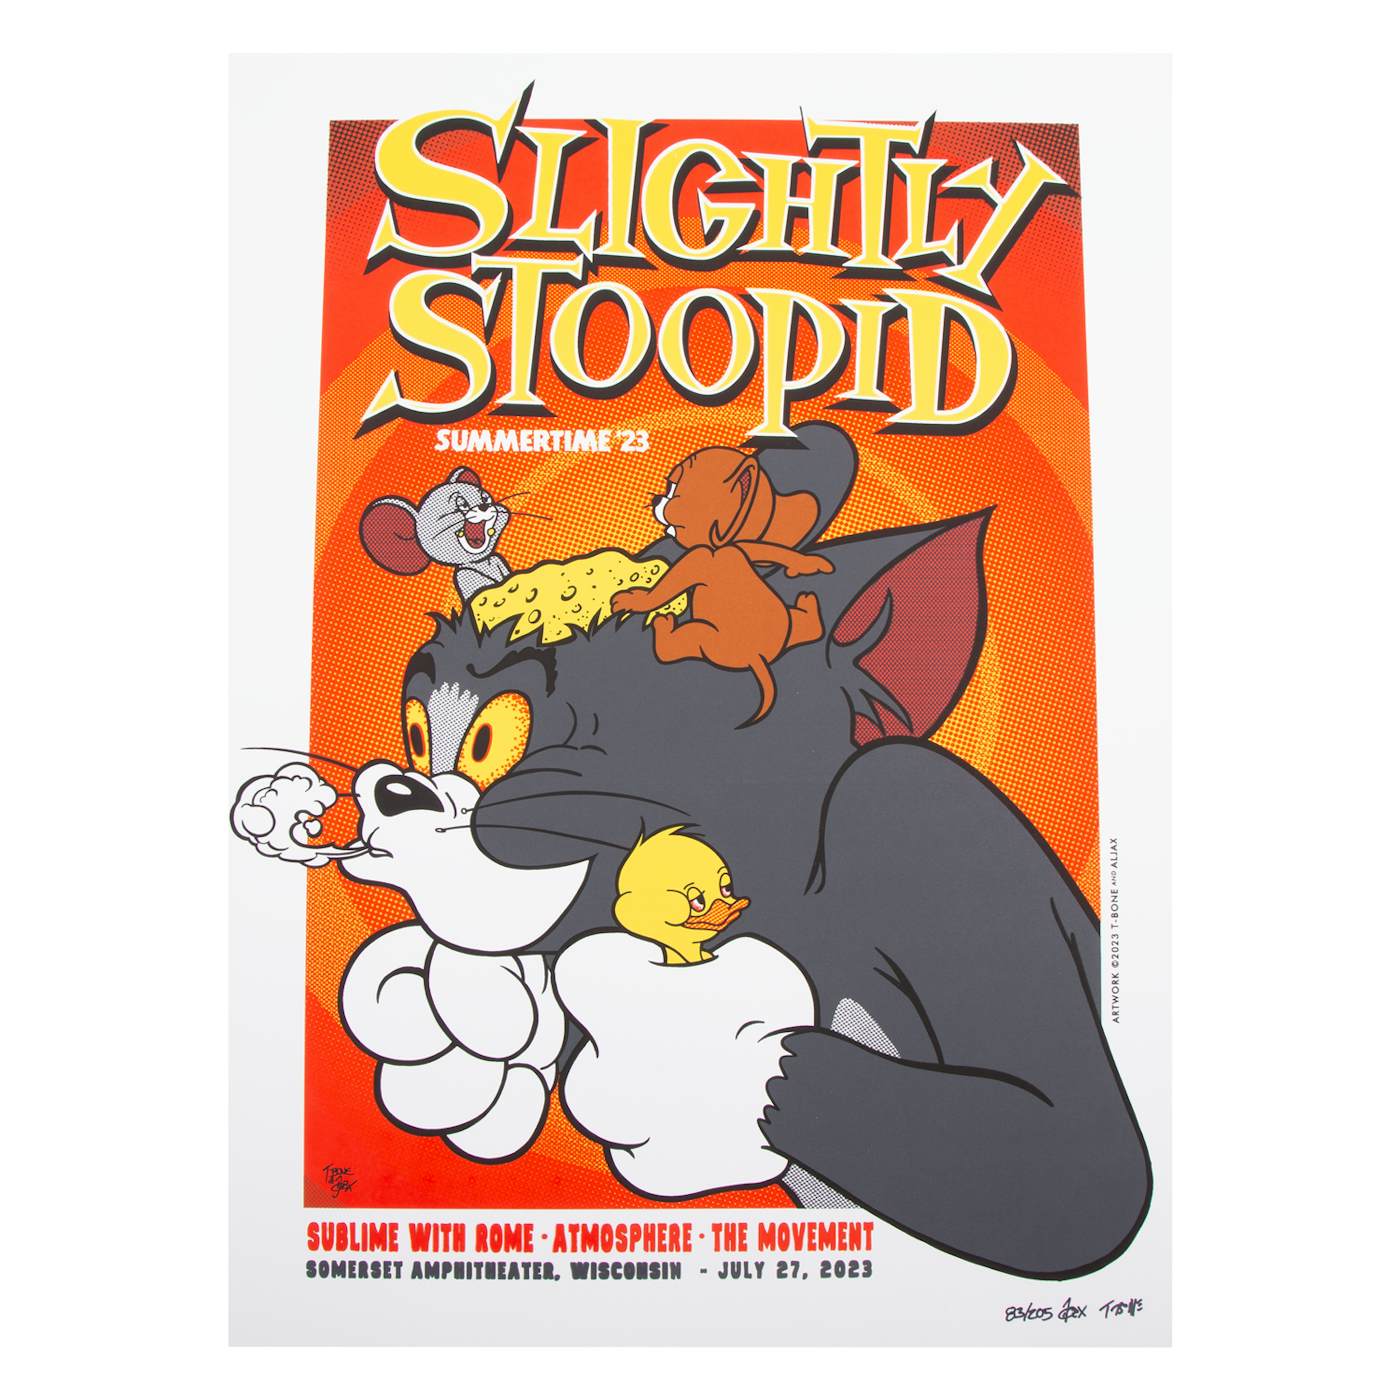 Slightly Stoopid 7/27/23 Somerset, WI Show Poster by T-Bone + Aljax